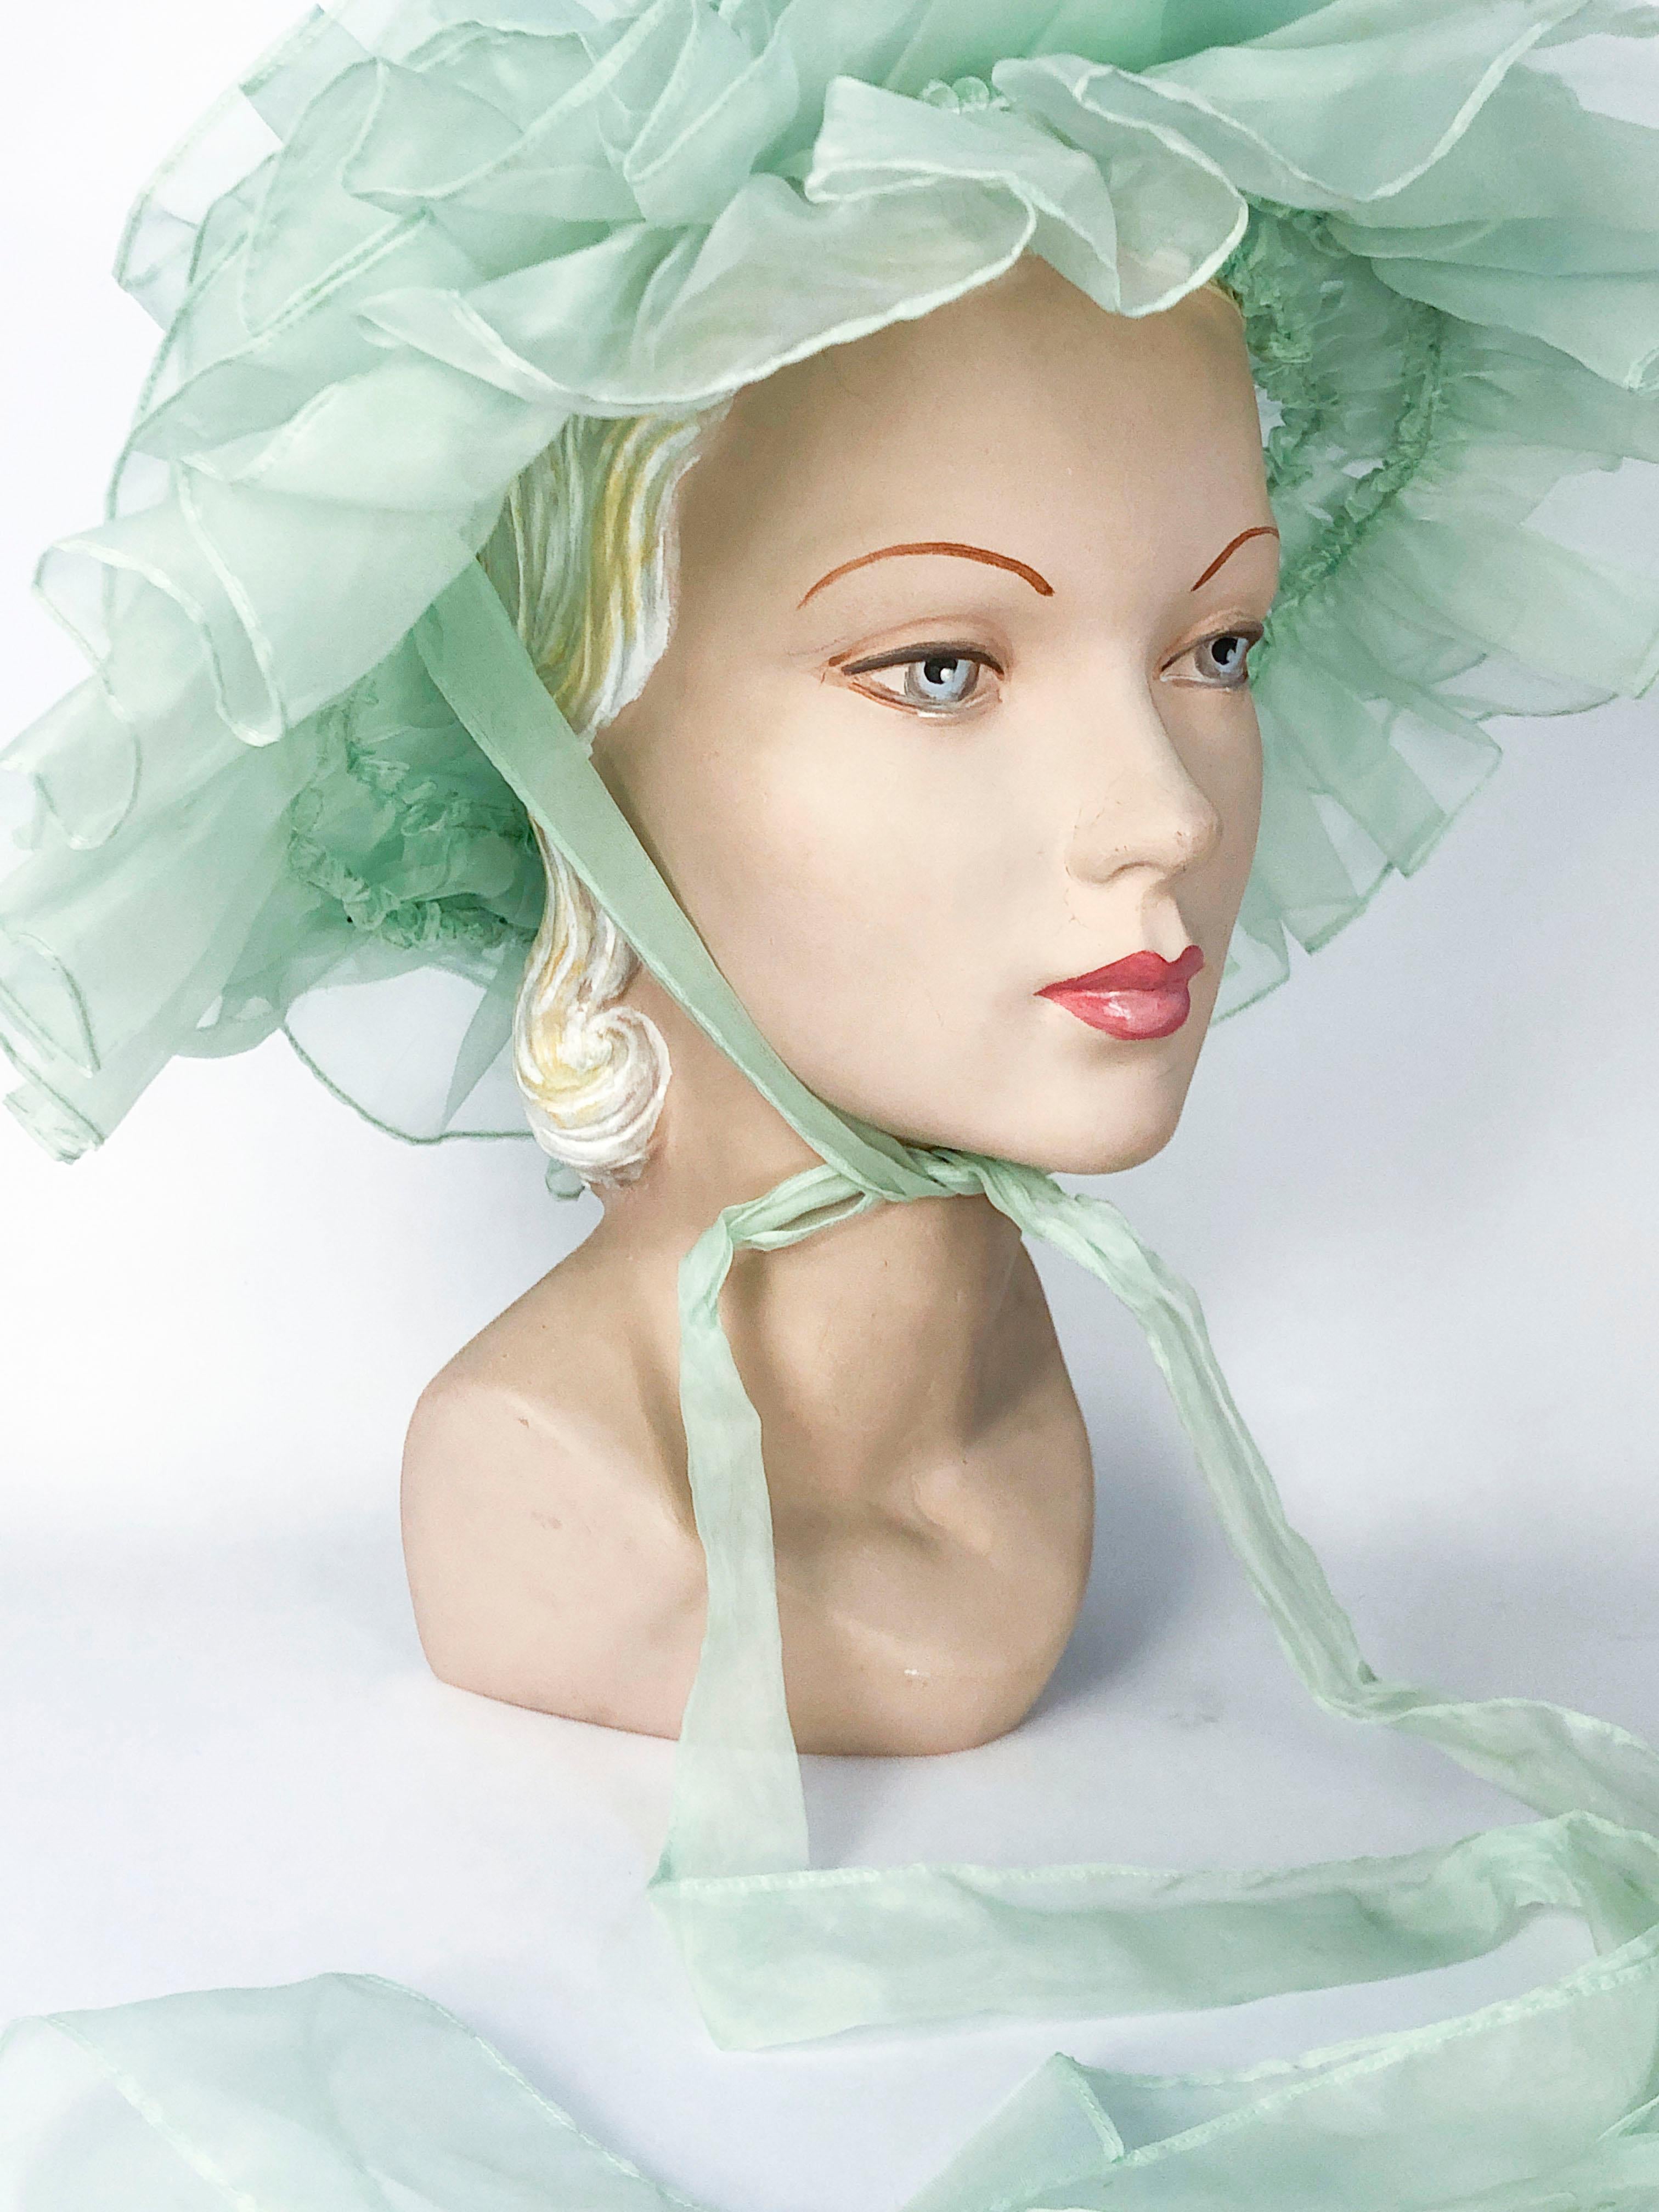 1970's Sea Foam Green Fashion Hat with Layered Ruffles and tie that creates a large bow. The ruffles are all hand ruched and applied to a wire frame.